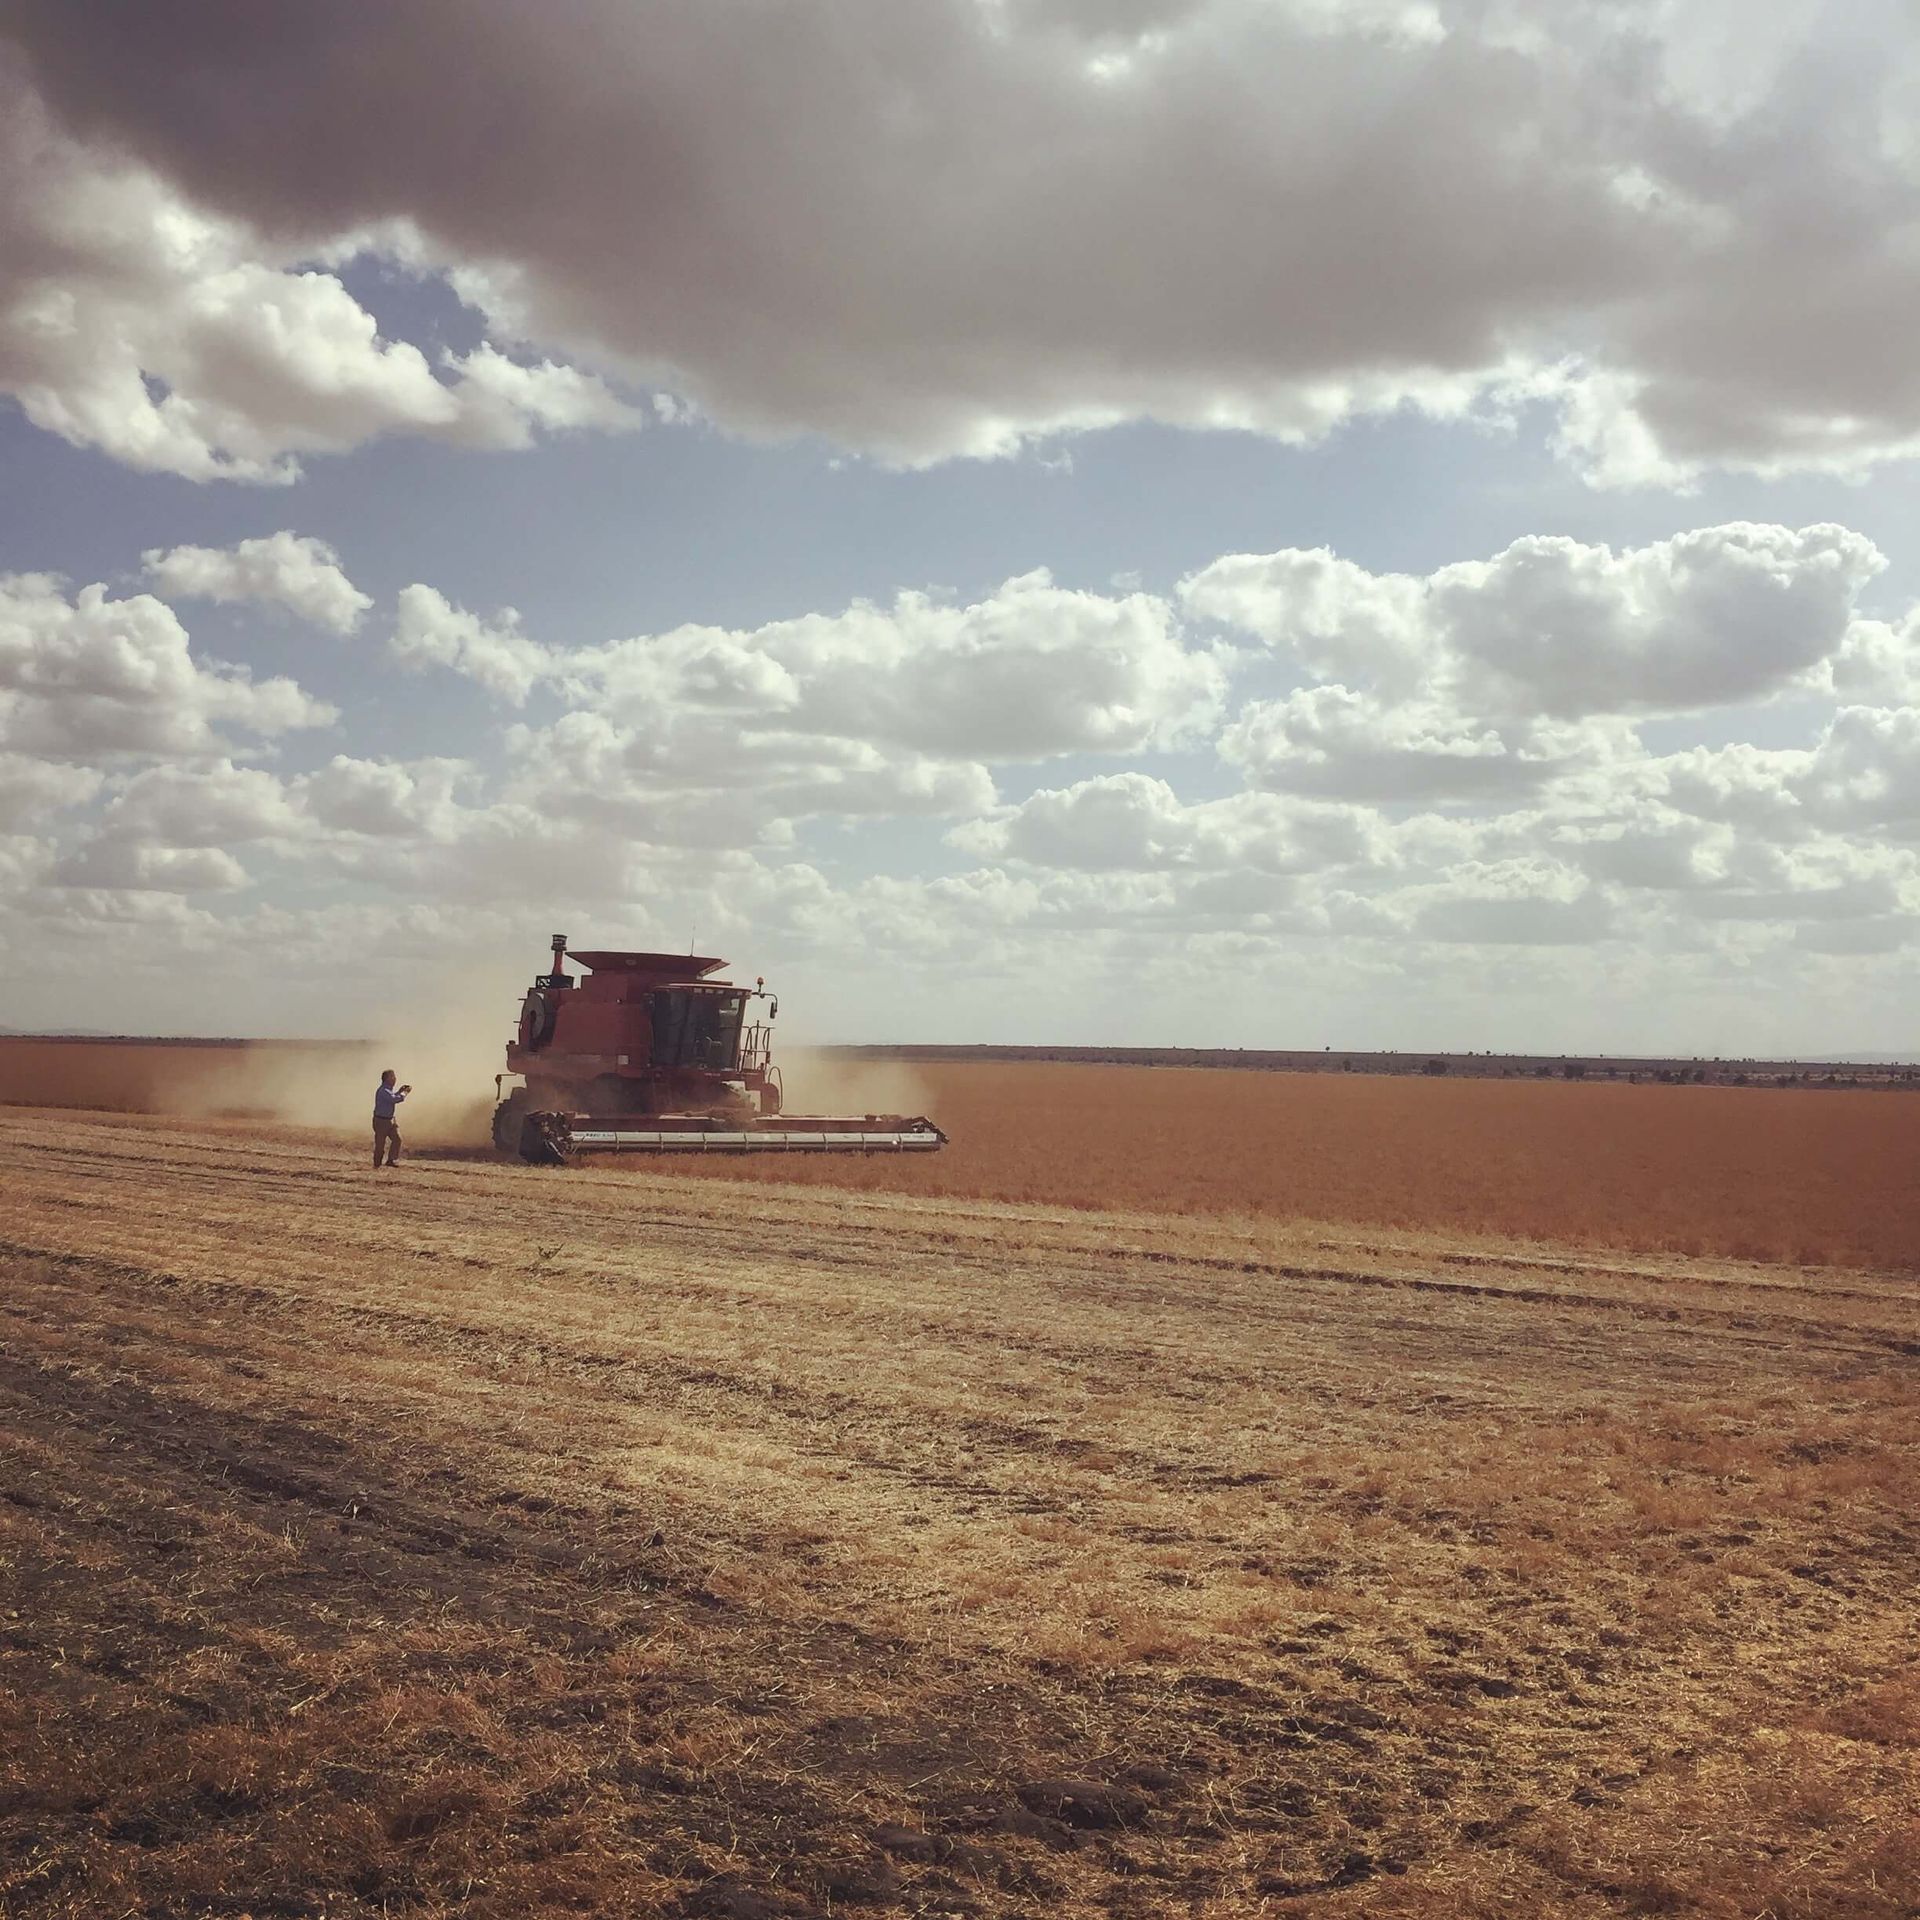 A combine harvester is working in a dry field